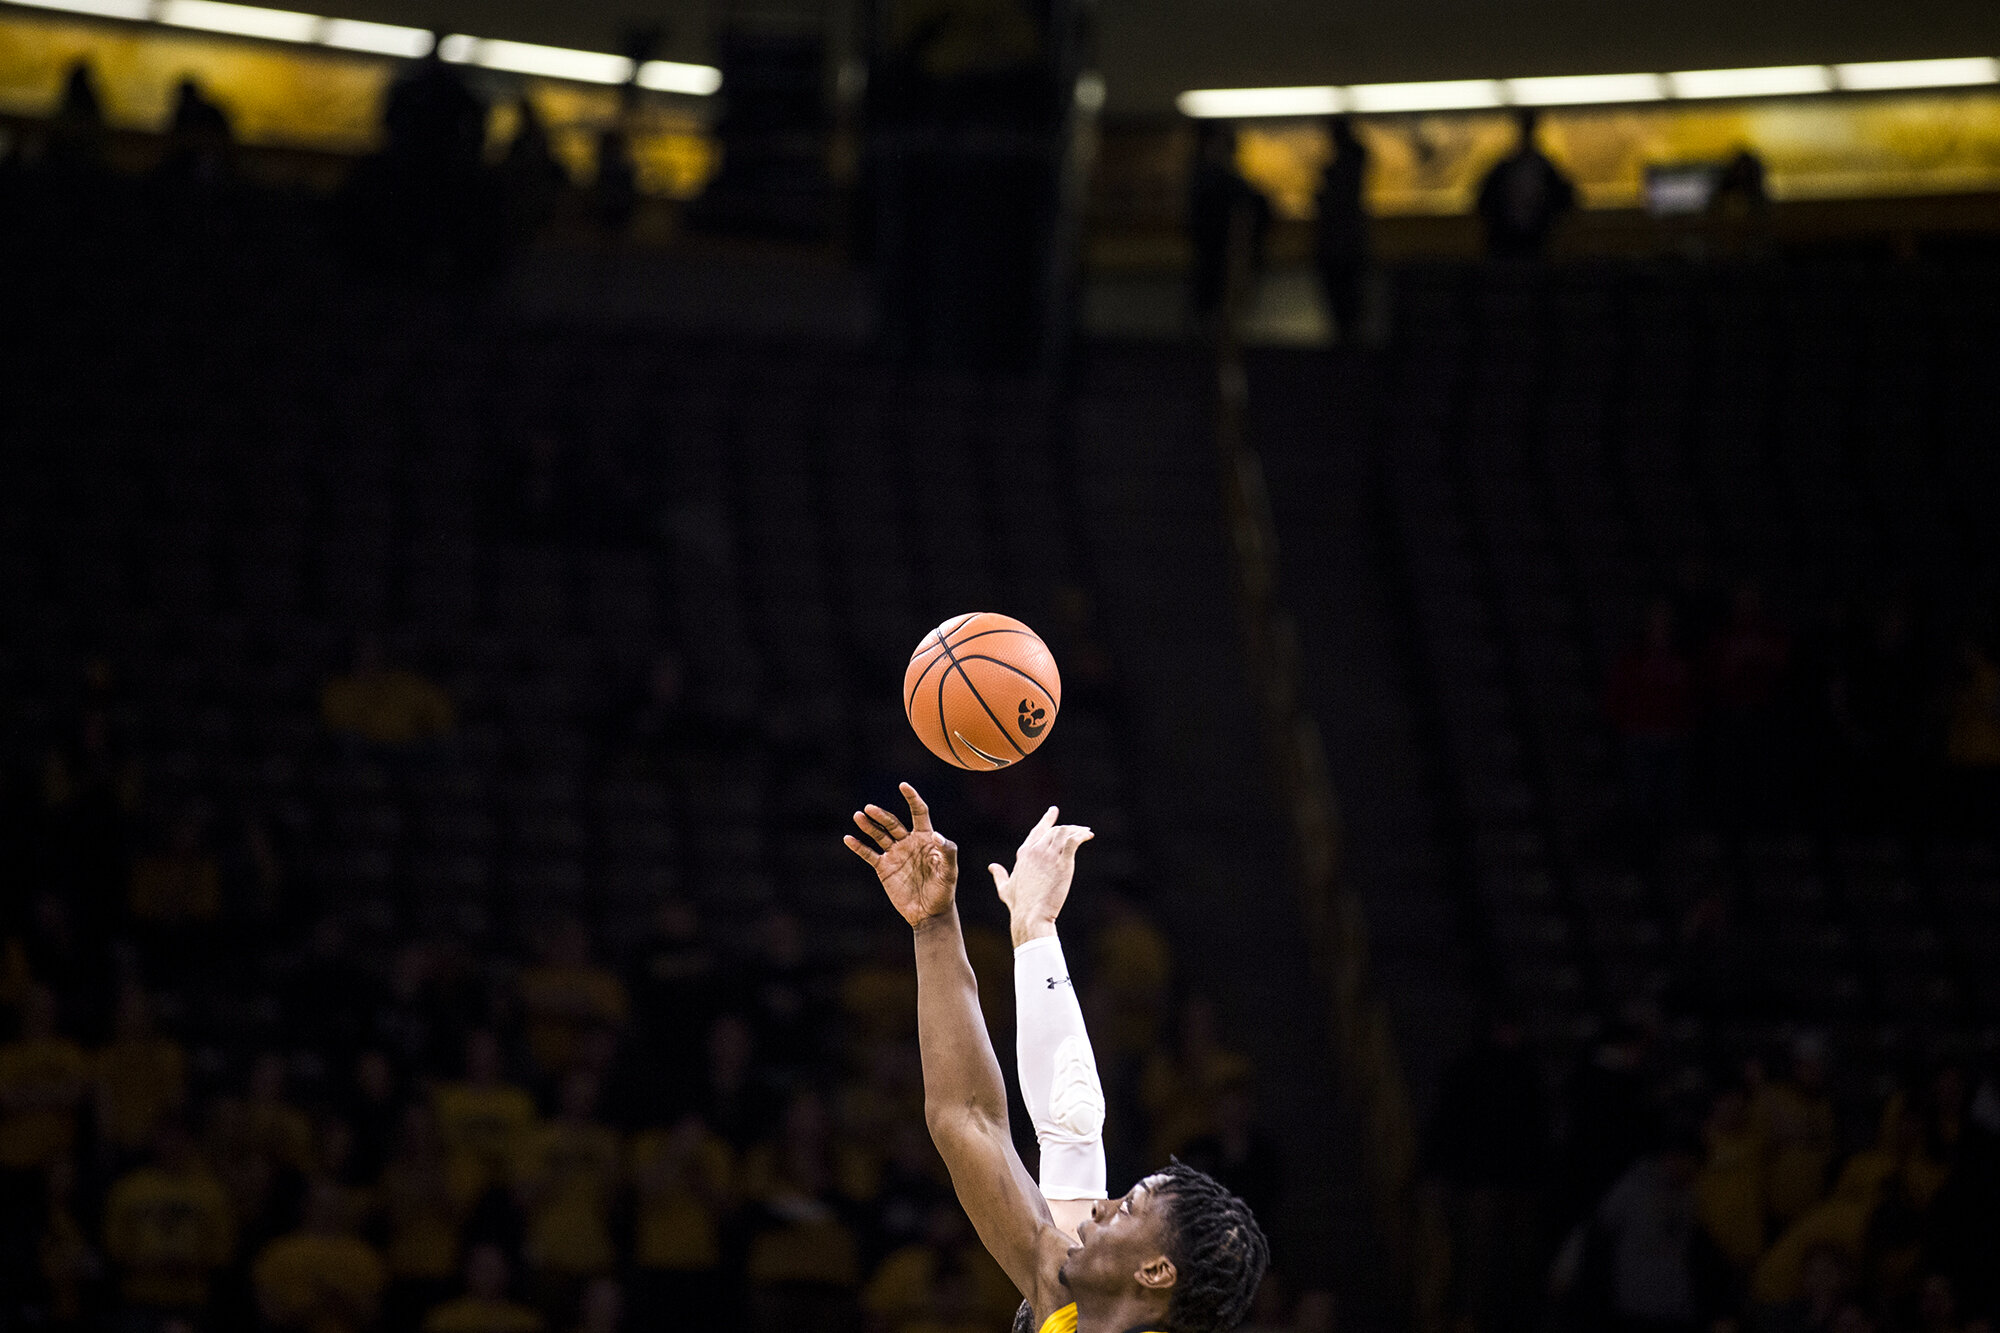  Iowa sophomore forward Tyler Cook jumps during tipoff of the NCAA men's basketball game between Iowa and Wisconsin at Carver-Hawkeye Arena, Jan. 23, 2018 in Iowa City, Iowa. 